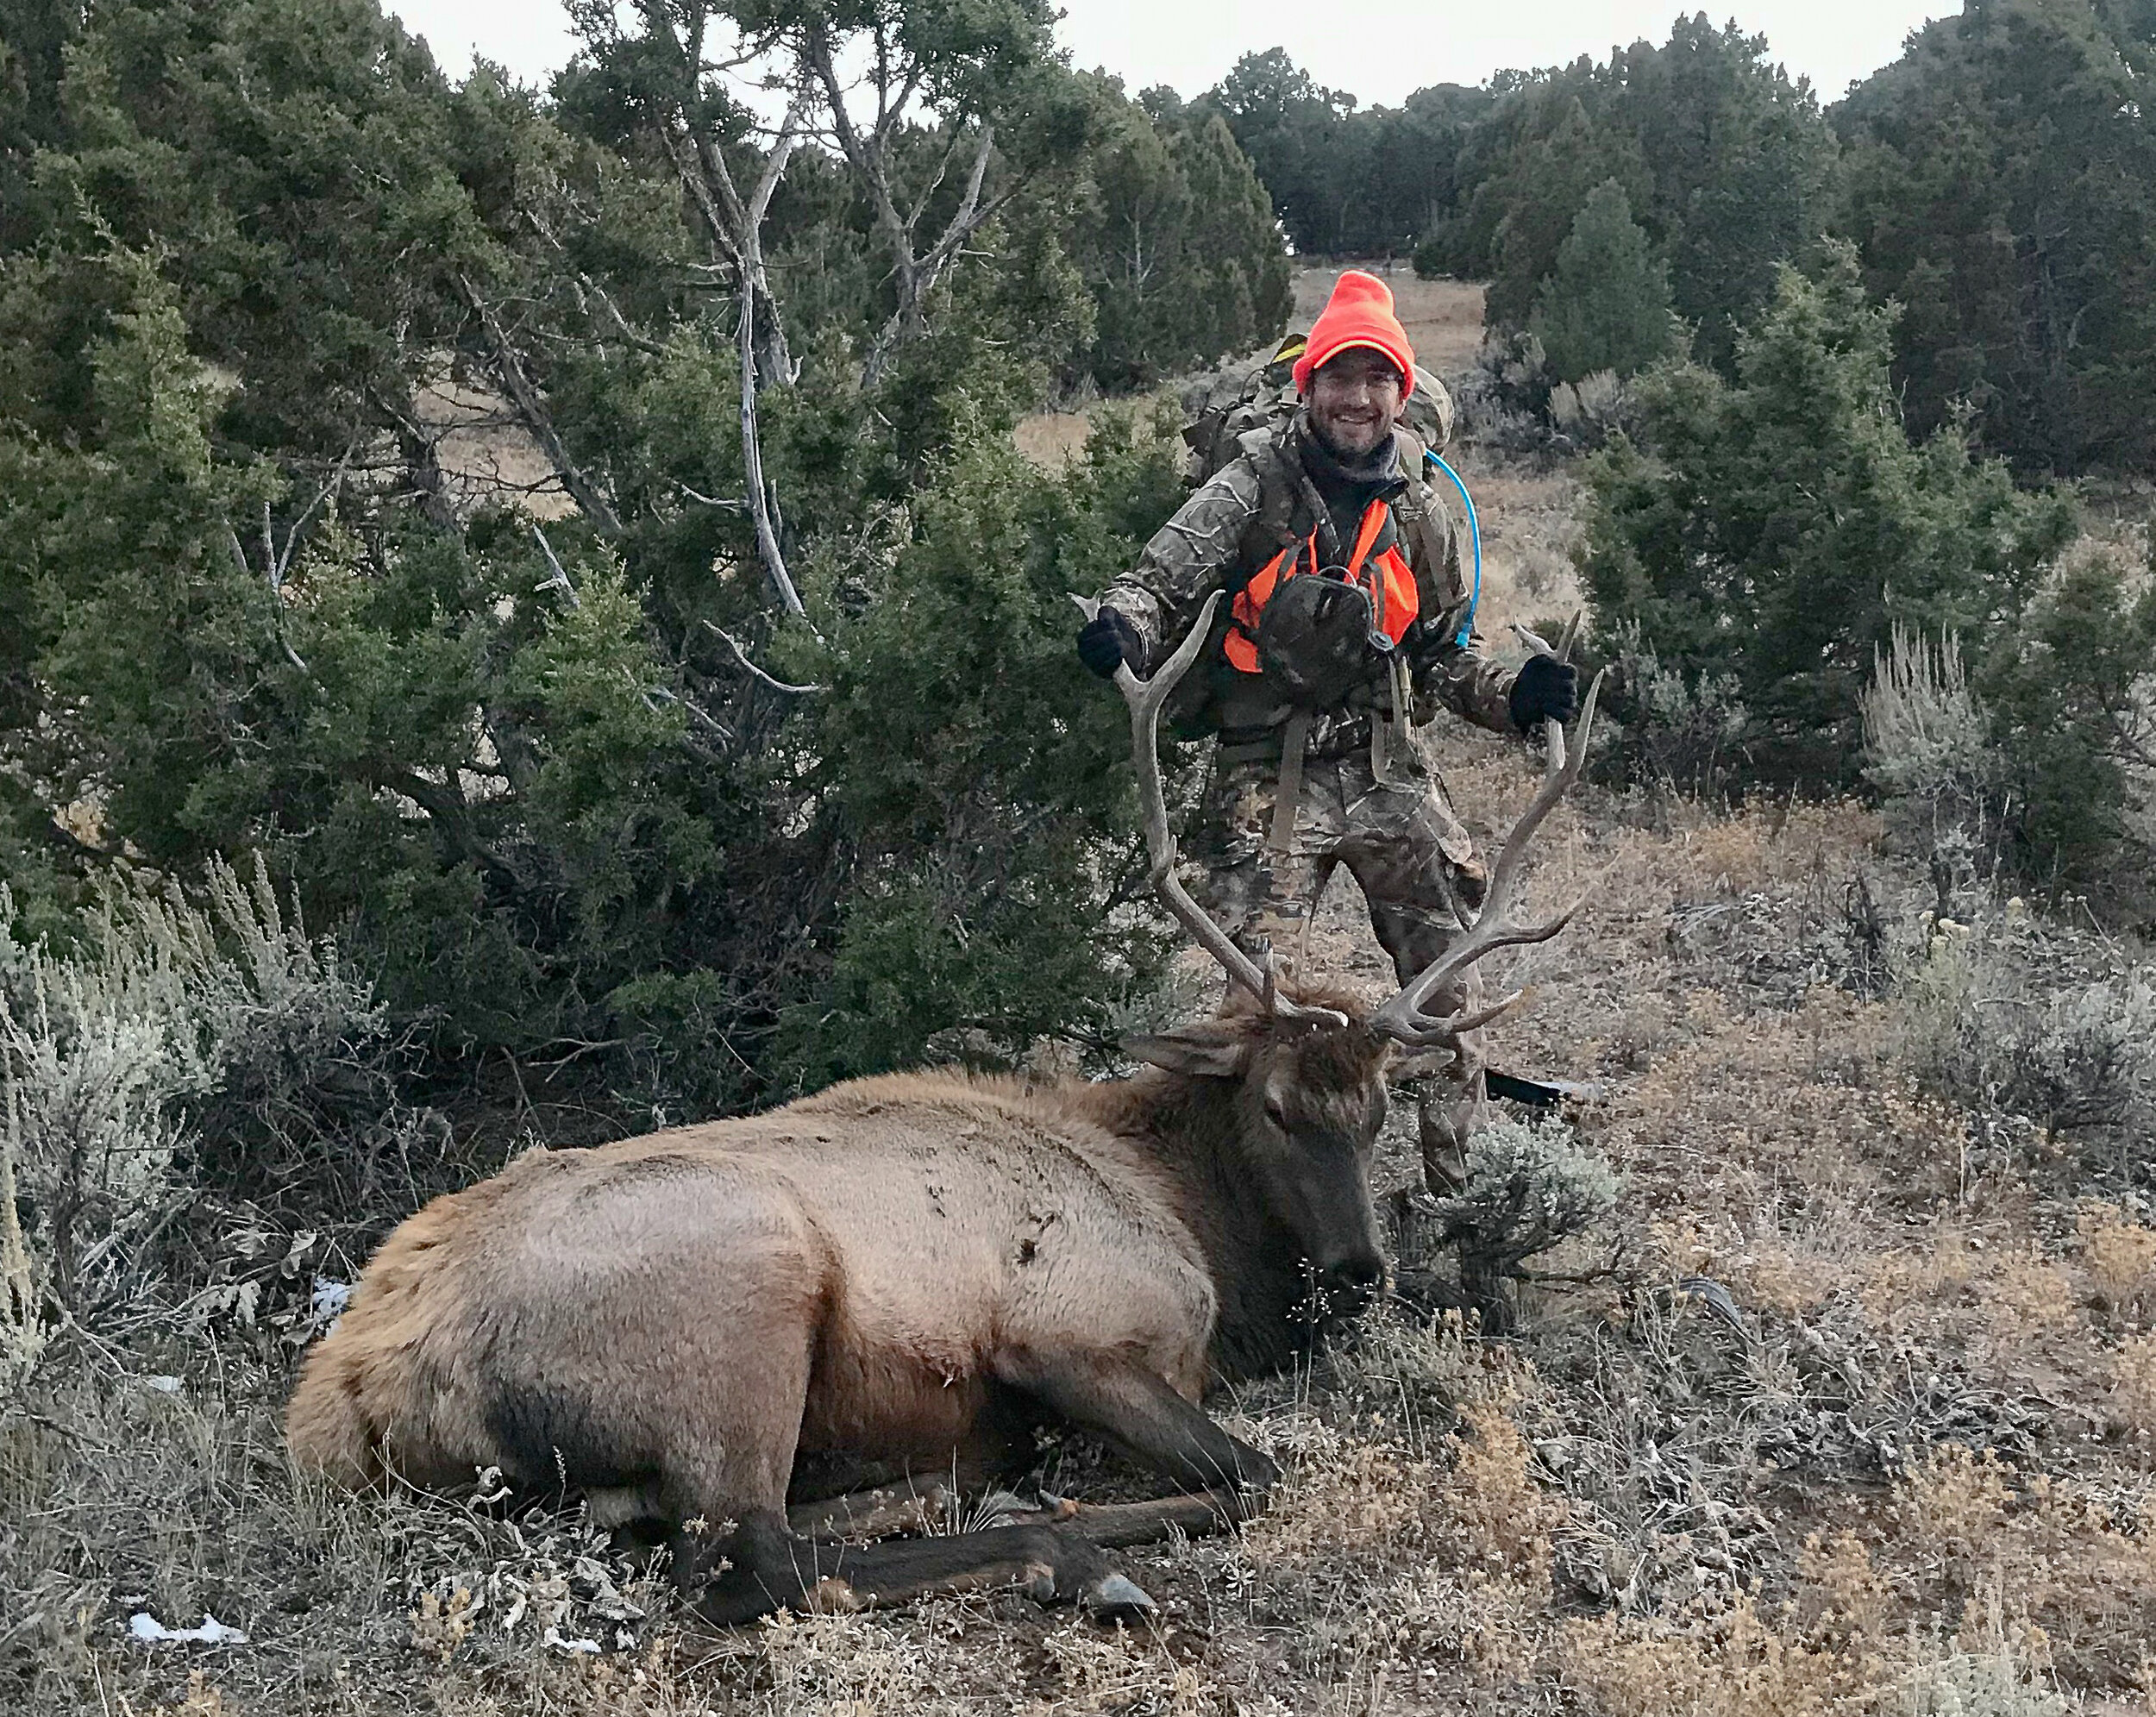 Damian with his bull